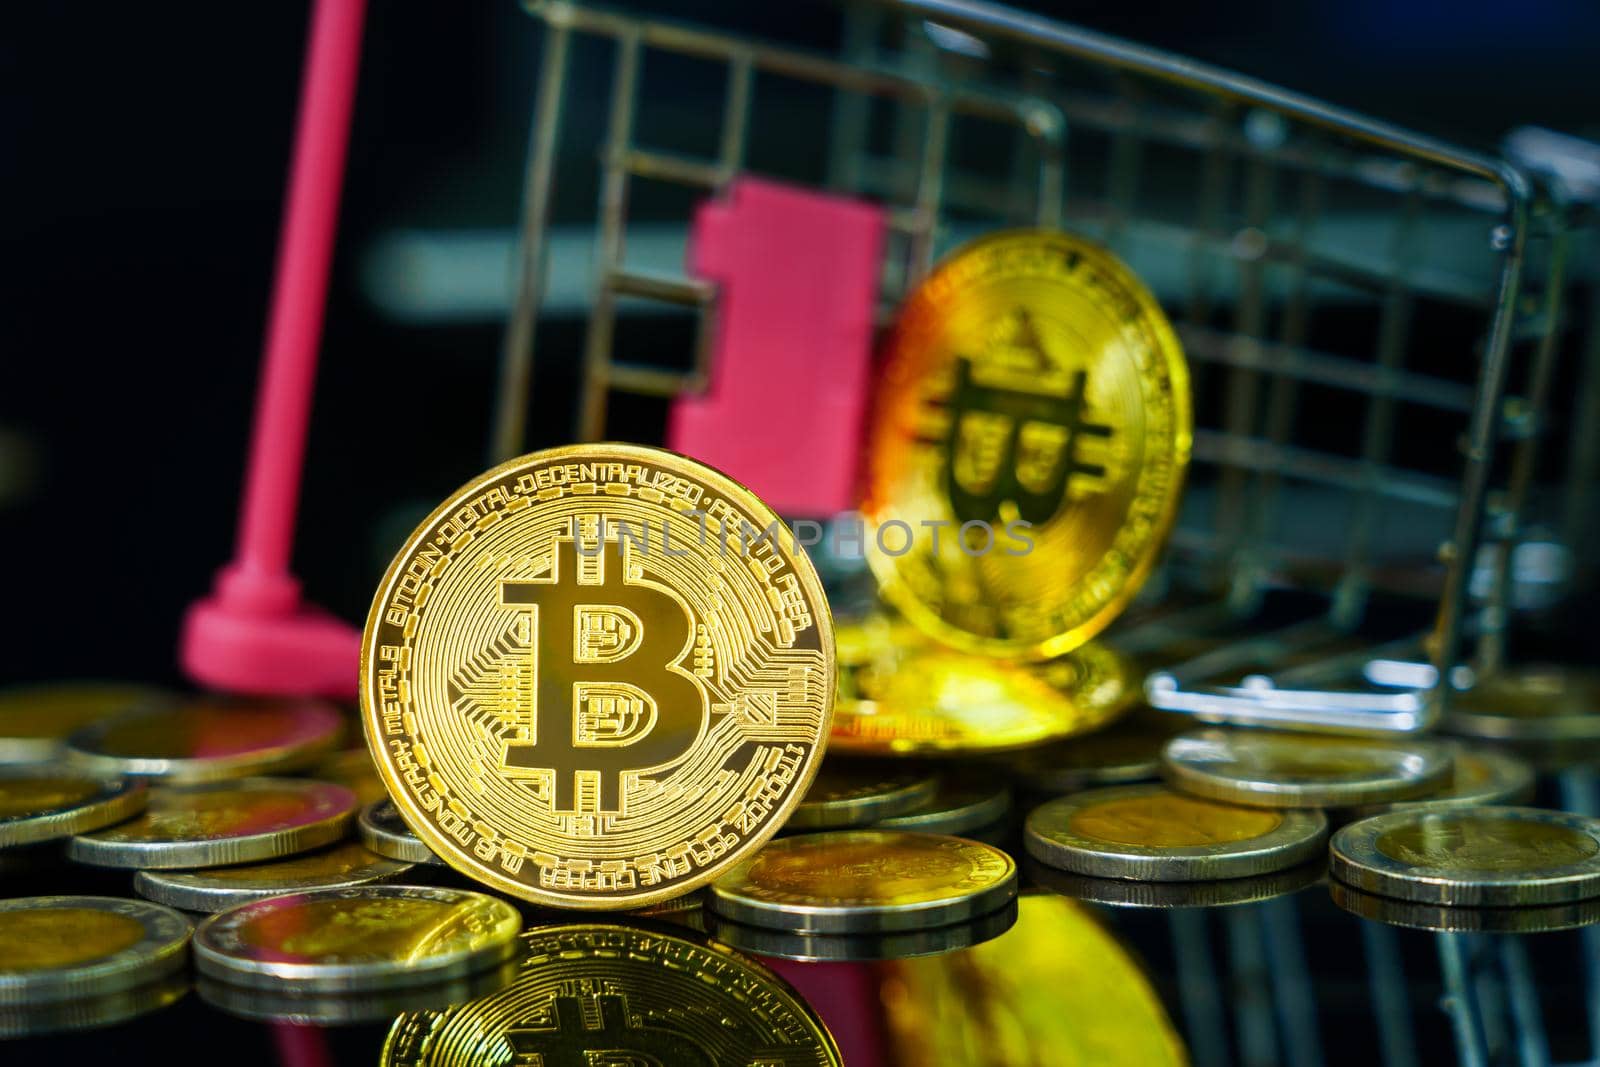 Bitcoin coin in shopping cart on black background by stoonn